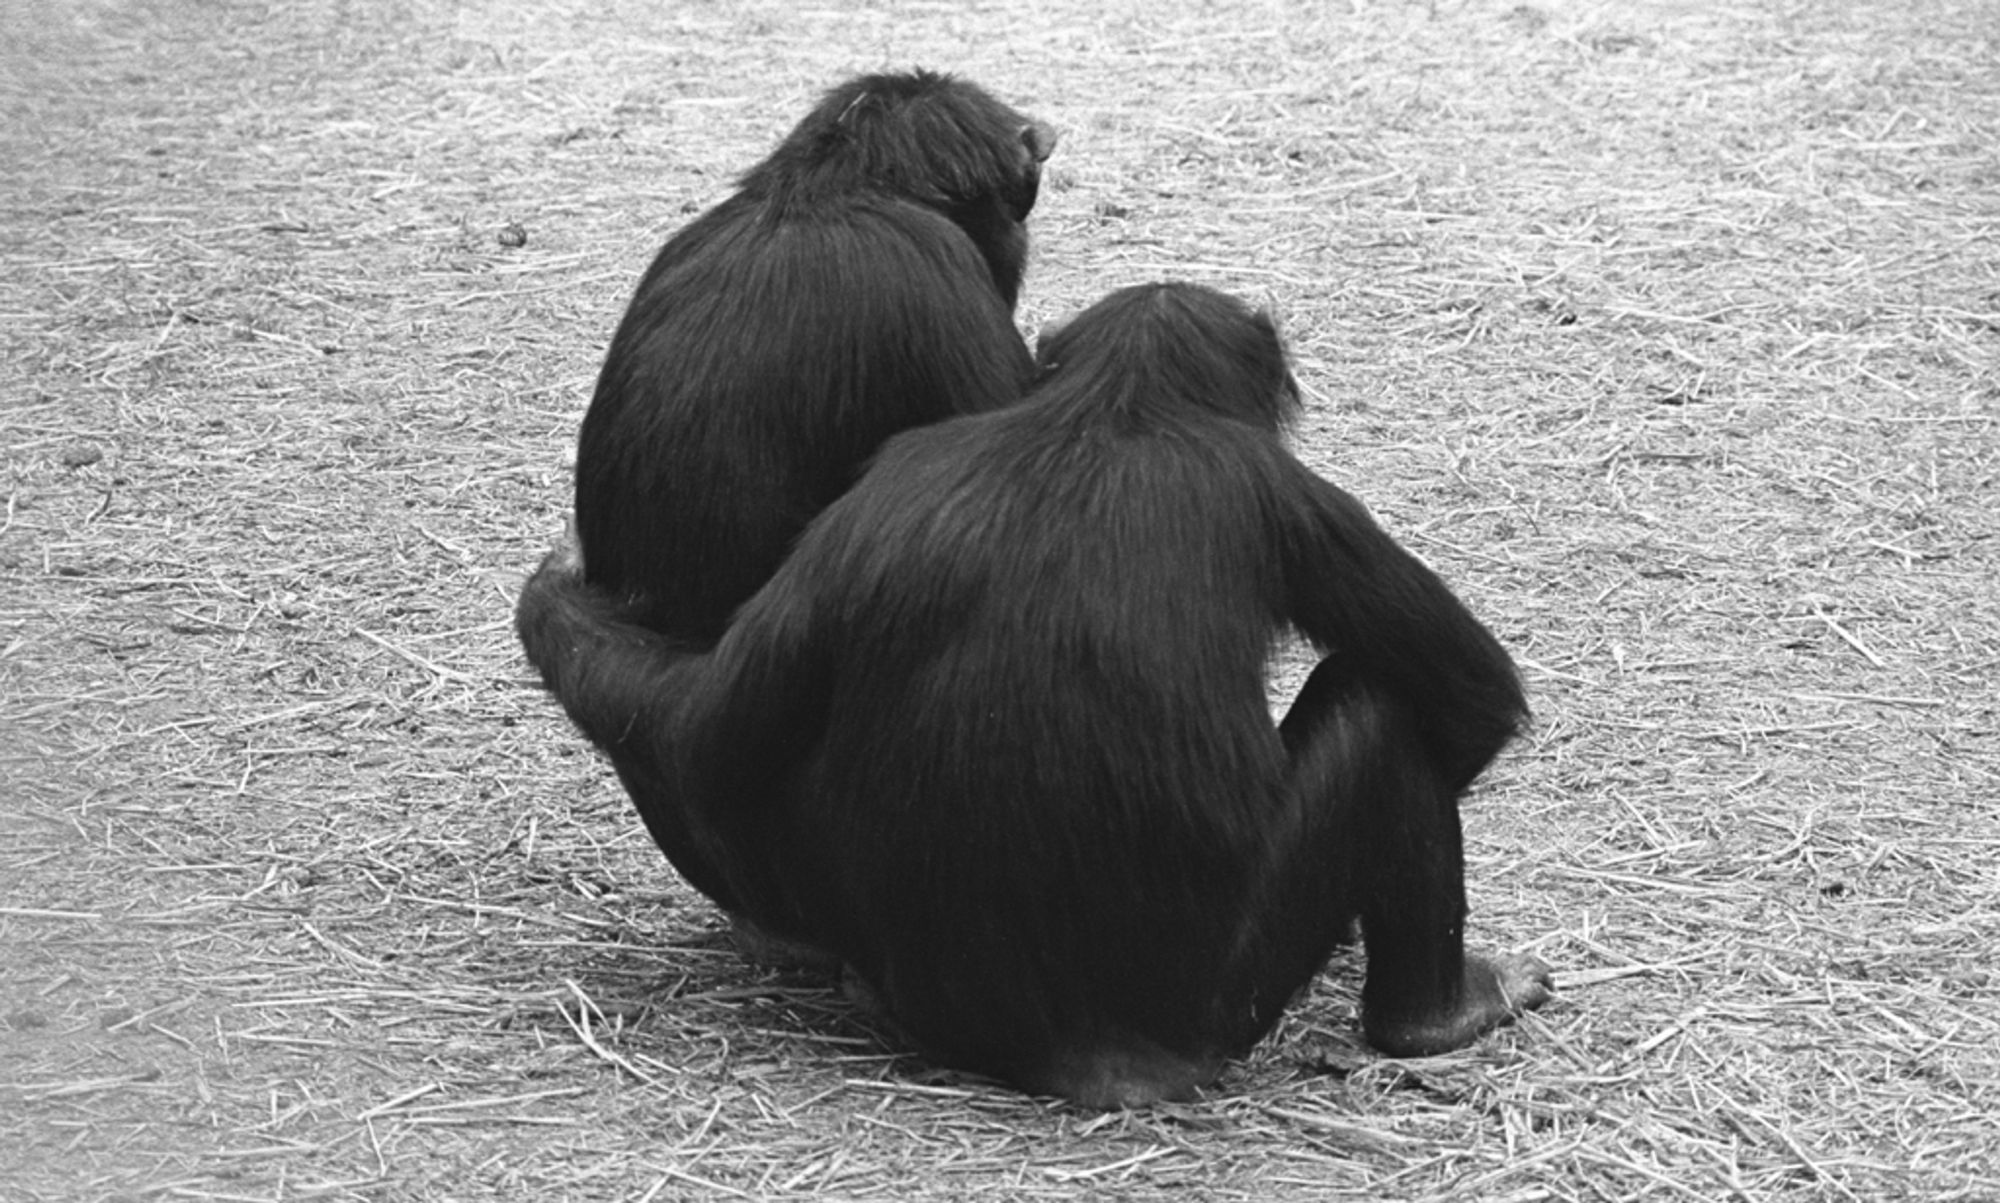 Photo of chimpanzees by Frans de Waal at the Yerkes Primate Center; a mother / daughter embracing while they watch a fight ongoing in the group, a form of reassurance seeking.